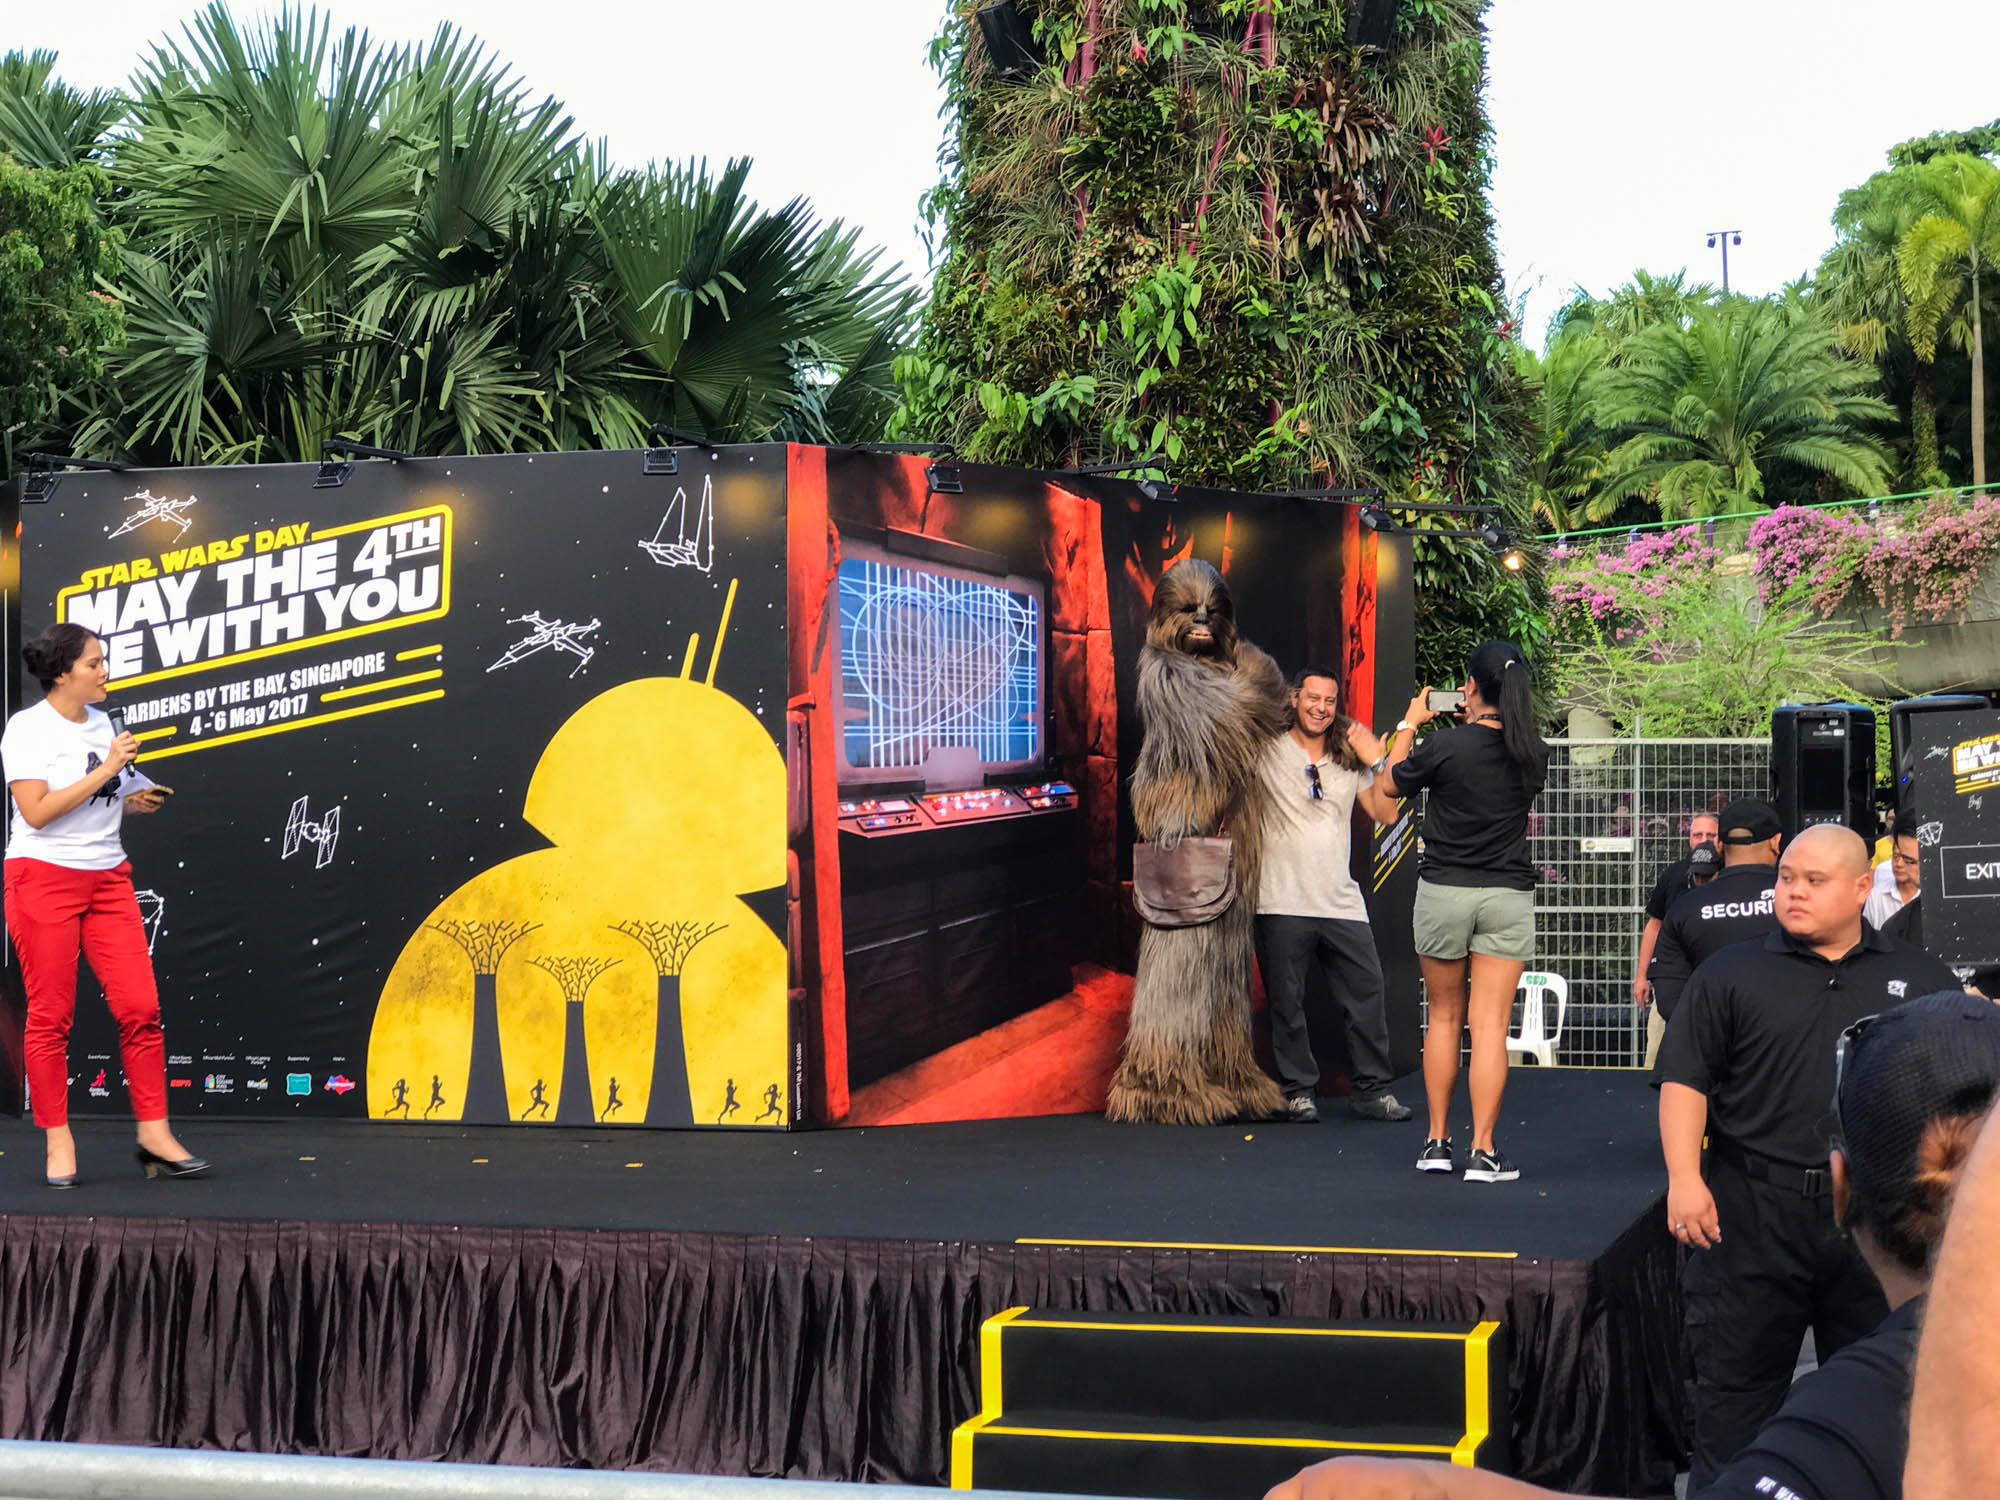 STAR WARS DAY: MAY THE 4TH BE WITH YOU SINGAPORE